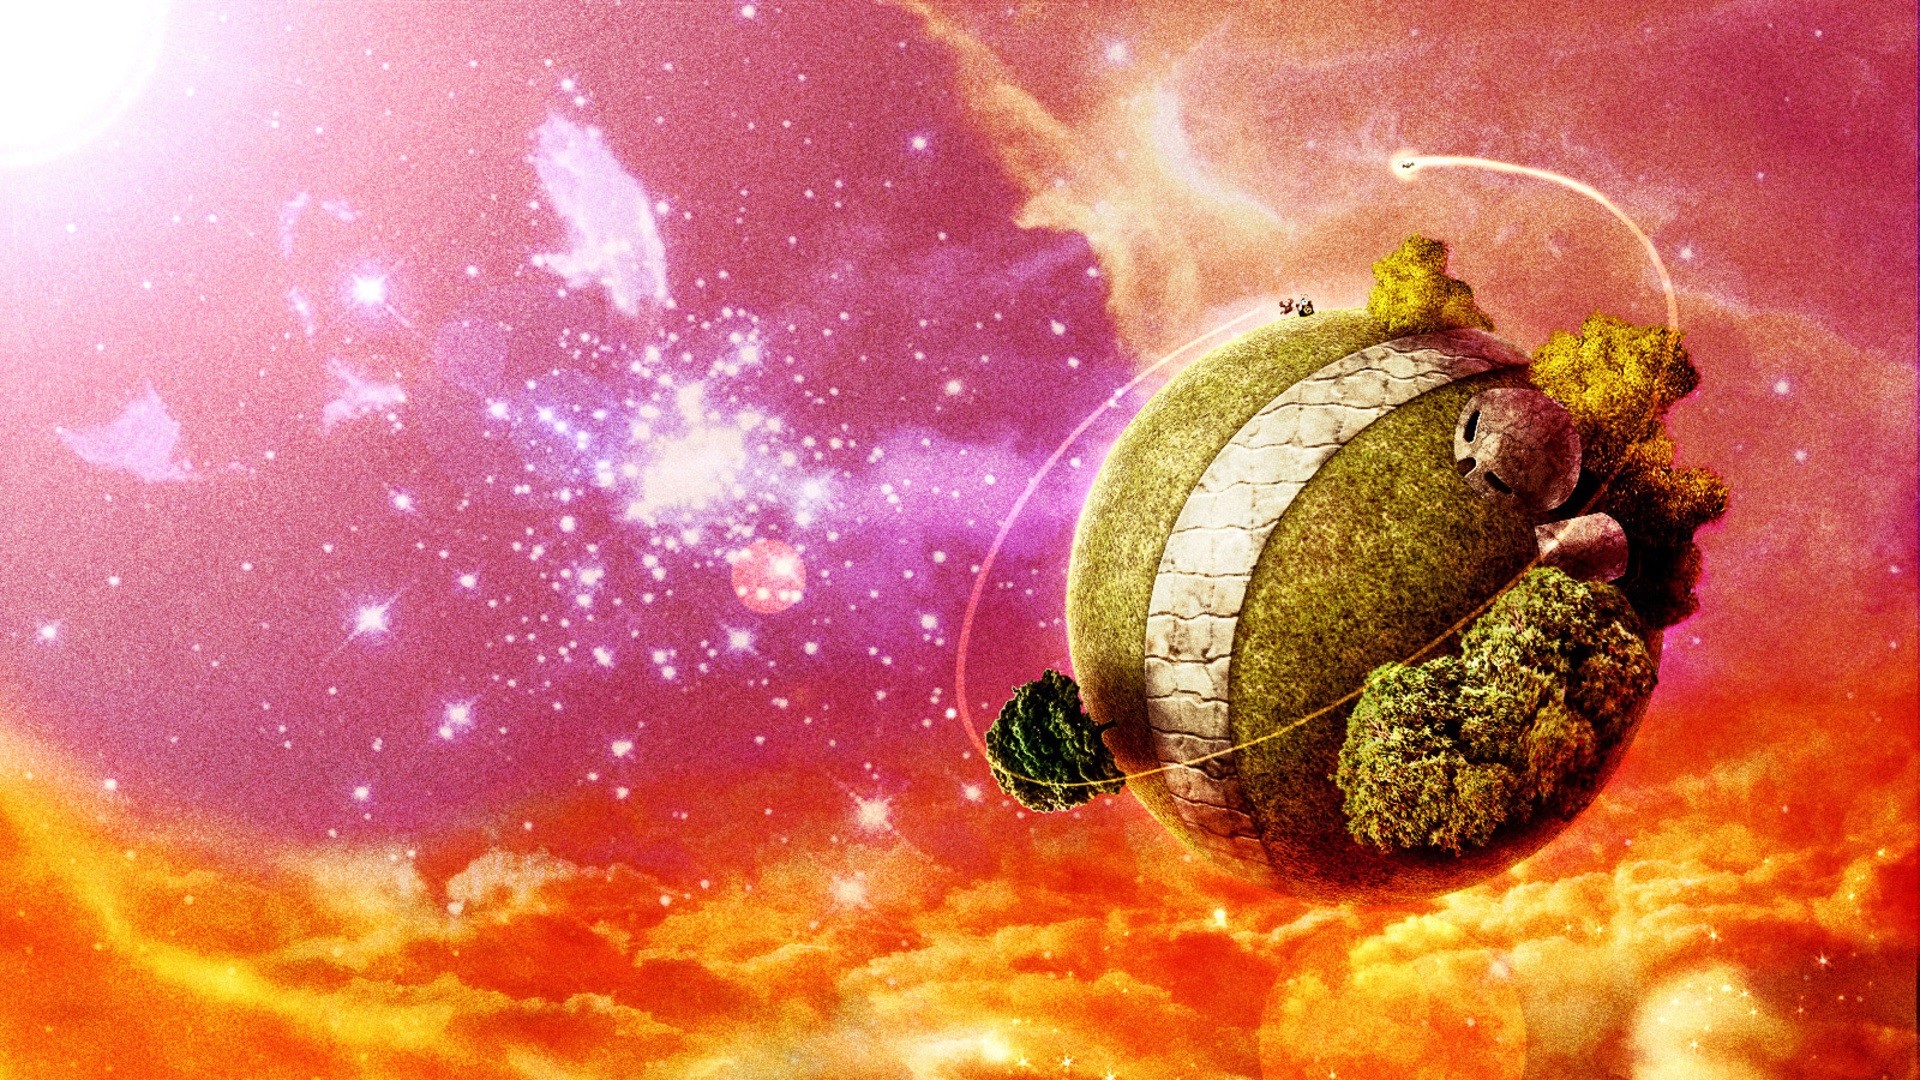 1920x1080 Dragon Ball Z images Dragon Balls HD wallpaper and background